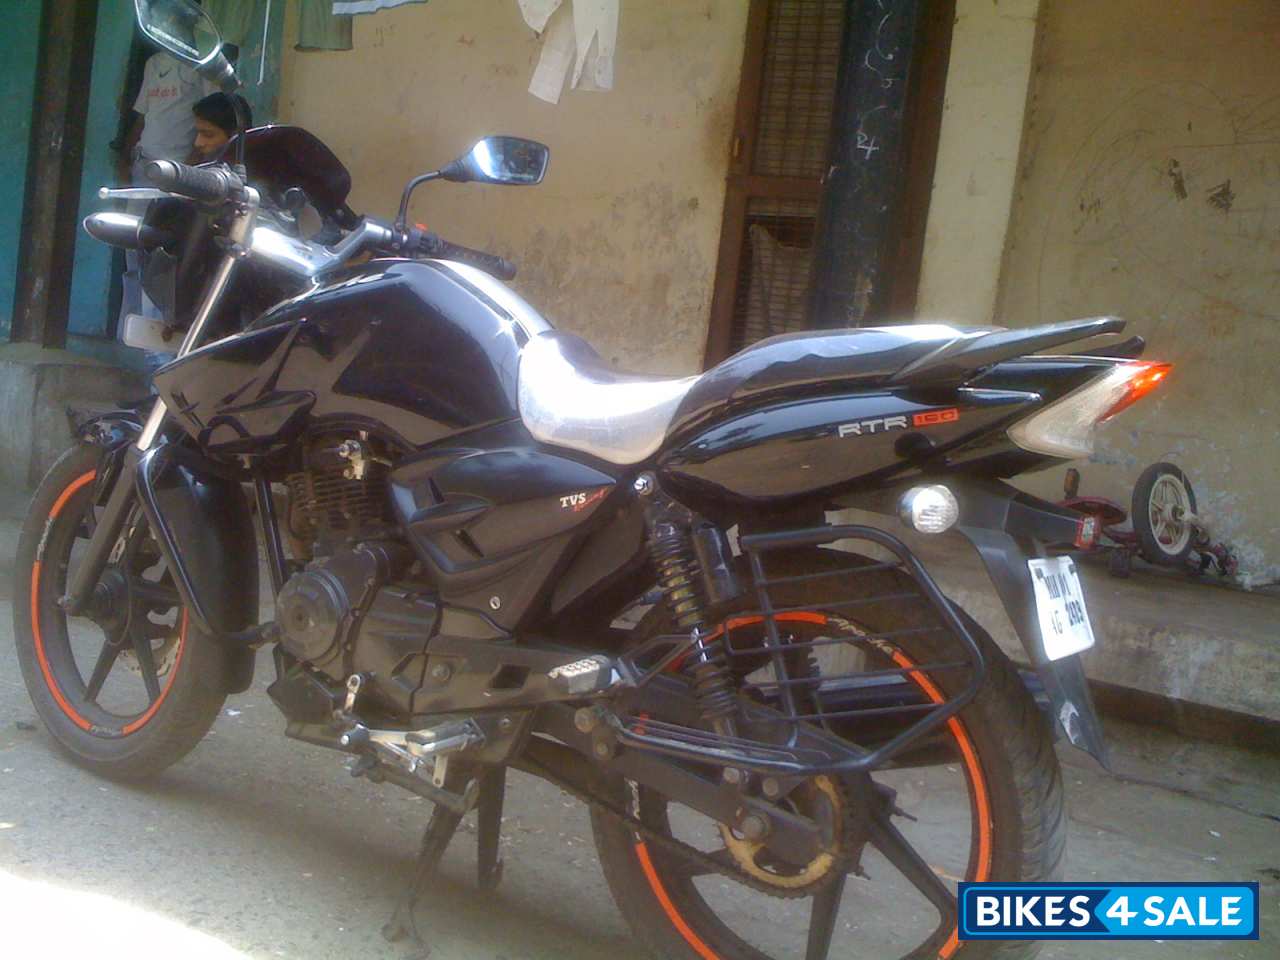 Used 08 Model Tvs Apache Rtr 160 For Sale In Mumbai Id Black Colour Bikes4sale